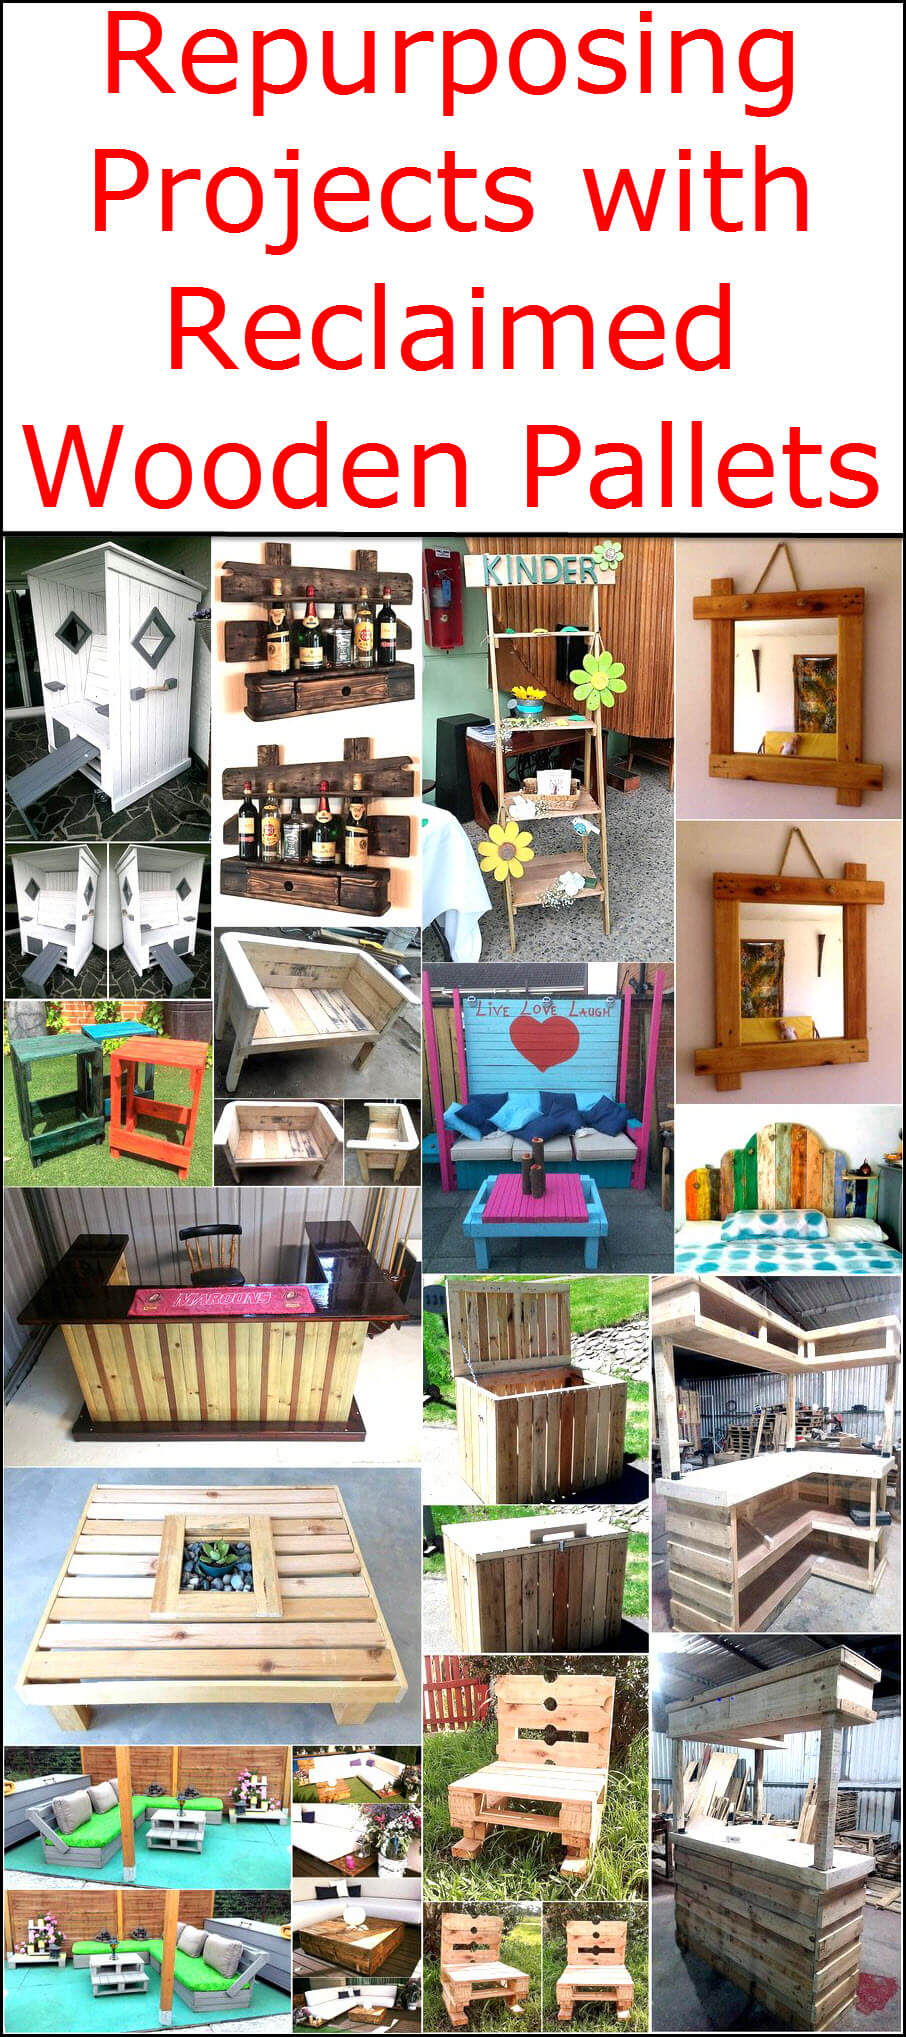 Repurposing Projects with Reclaimed Wooden Pallets